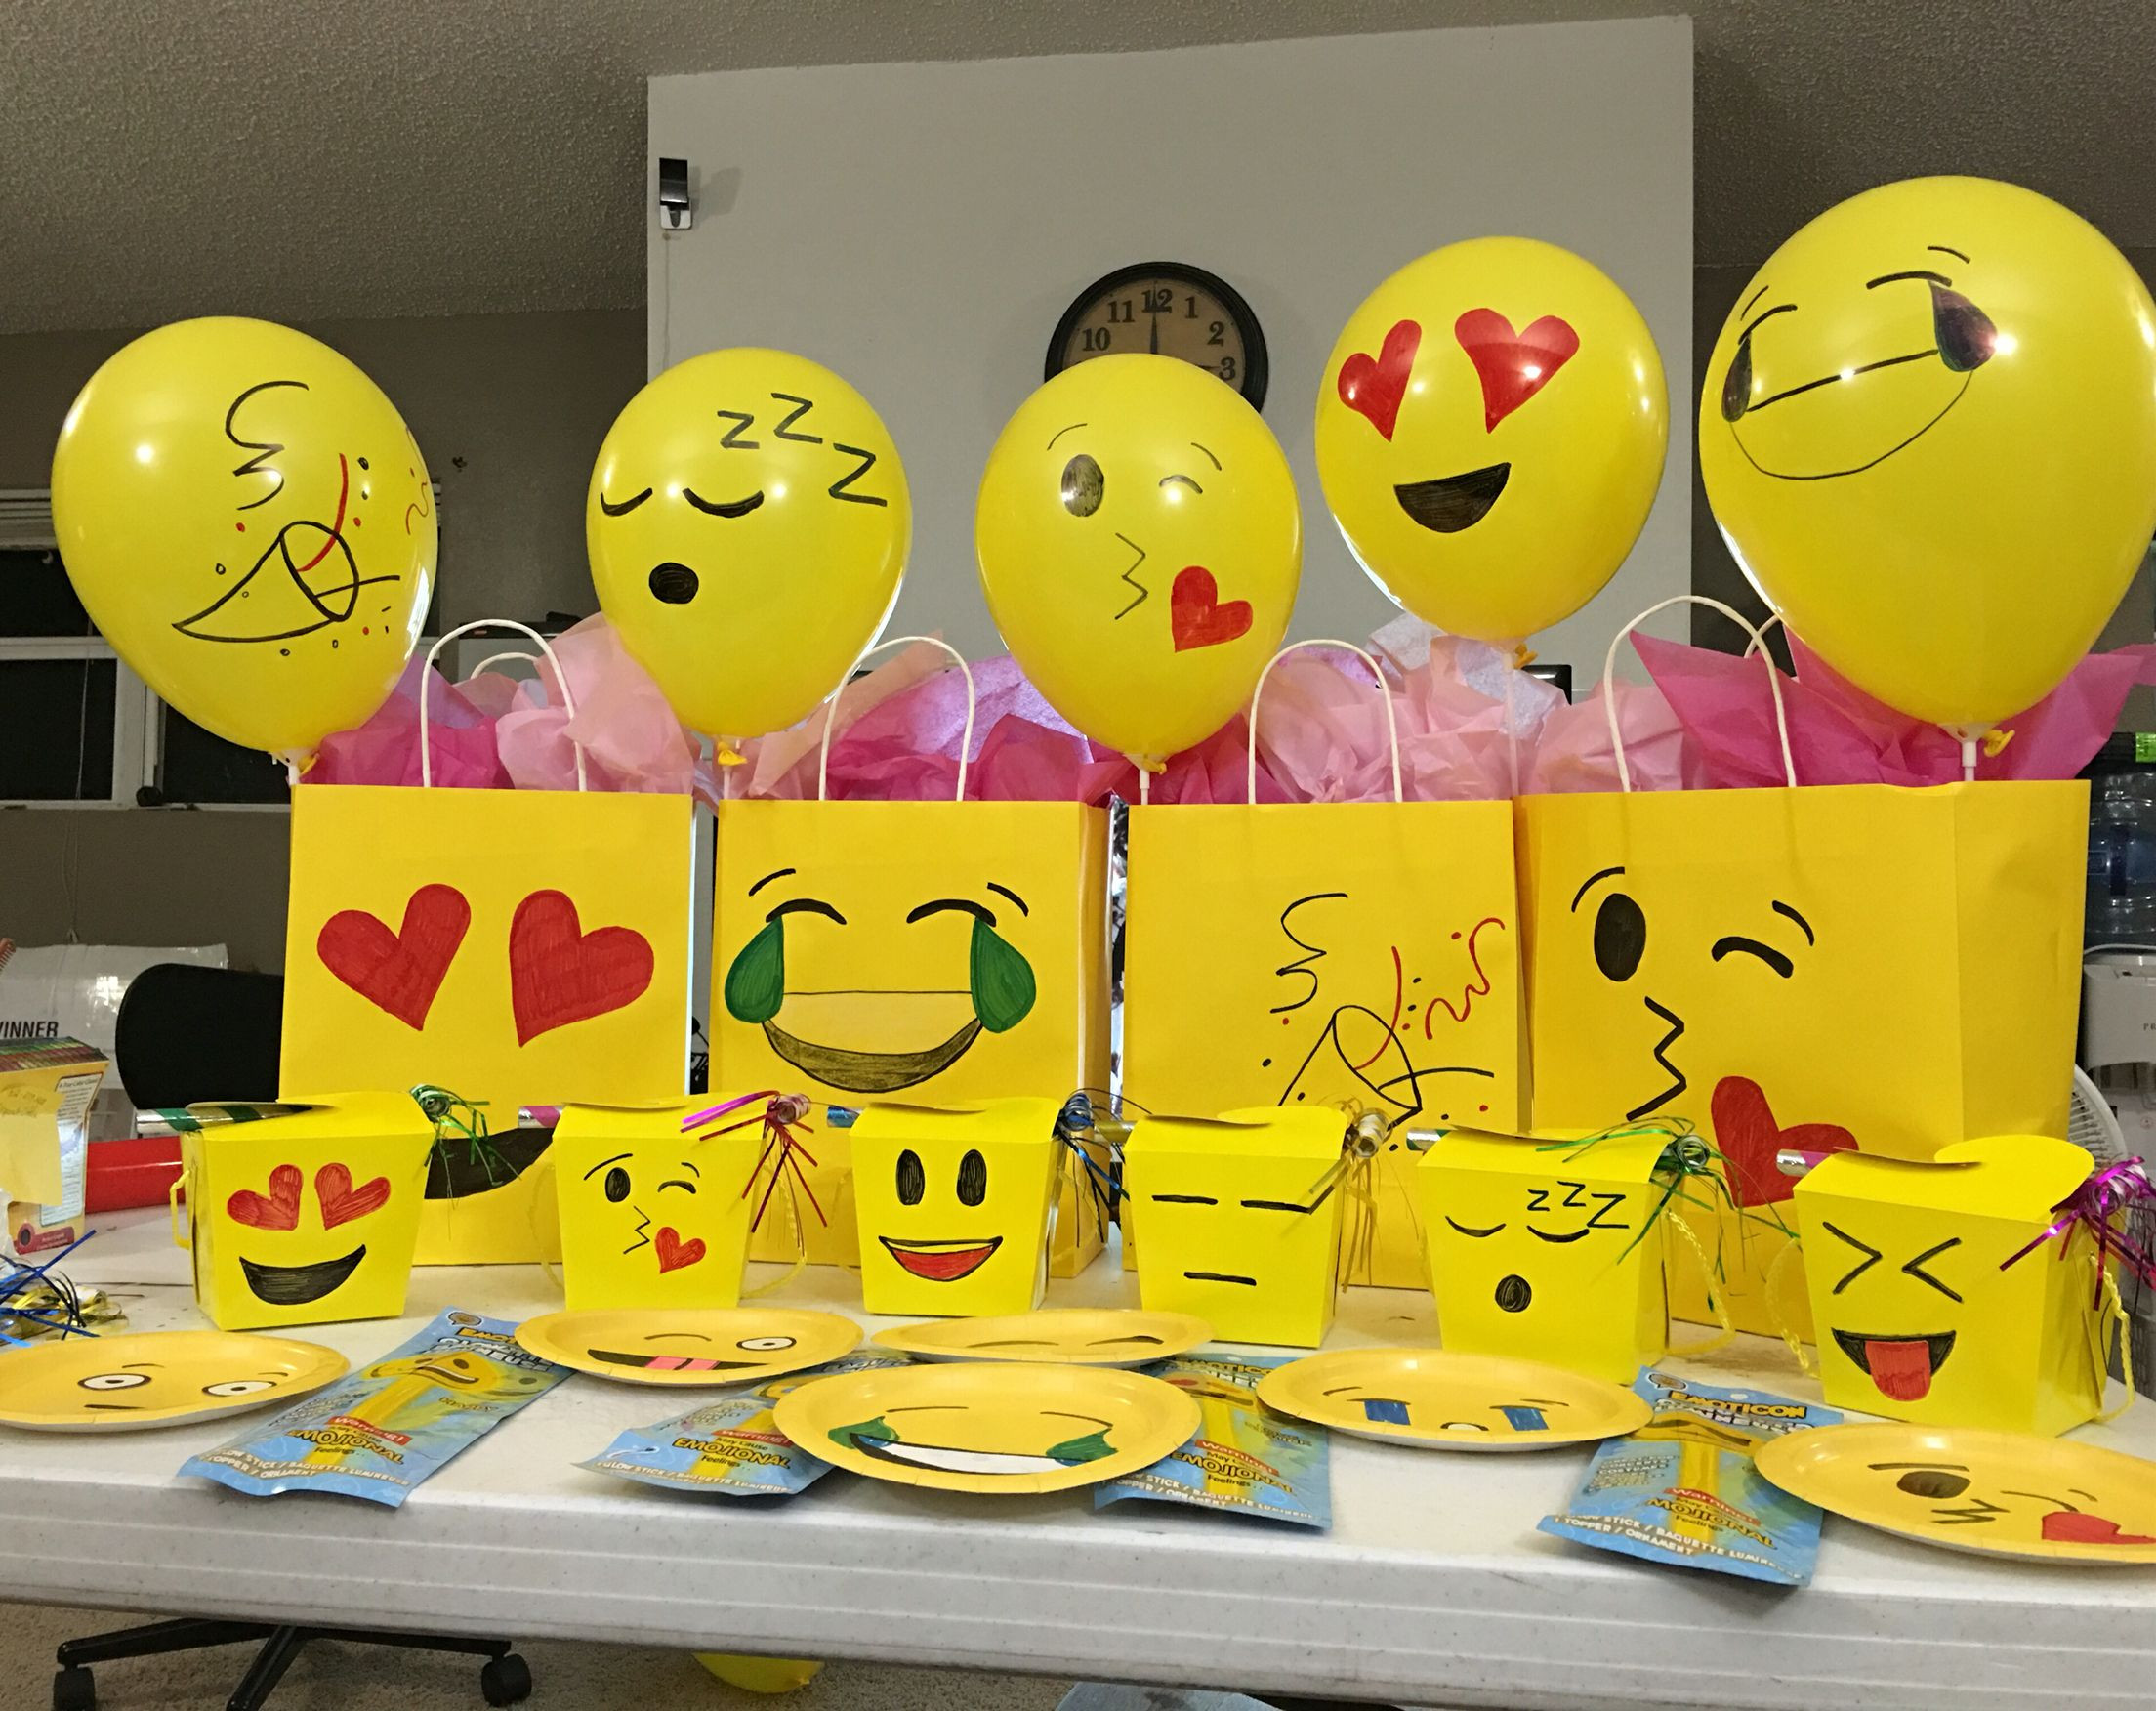 Emoji Birthday Decorations
 My husband and I made these emoji decorations for our